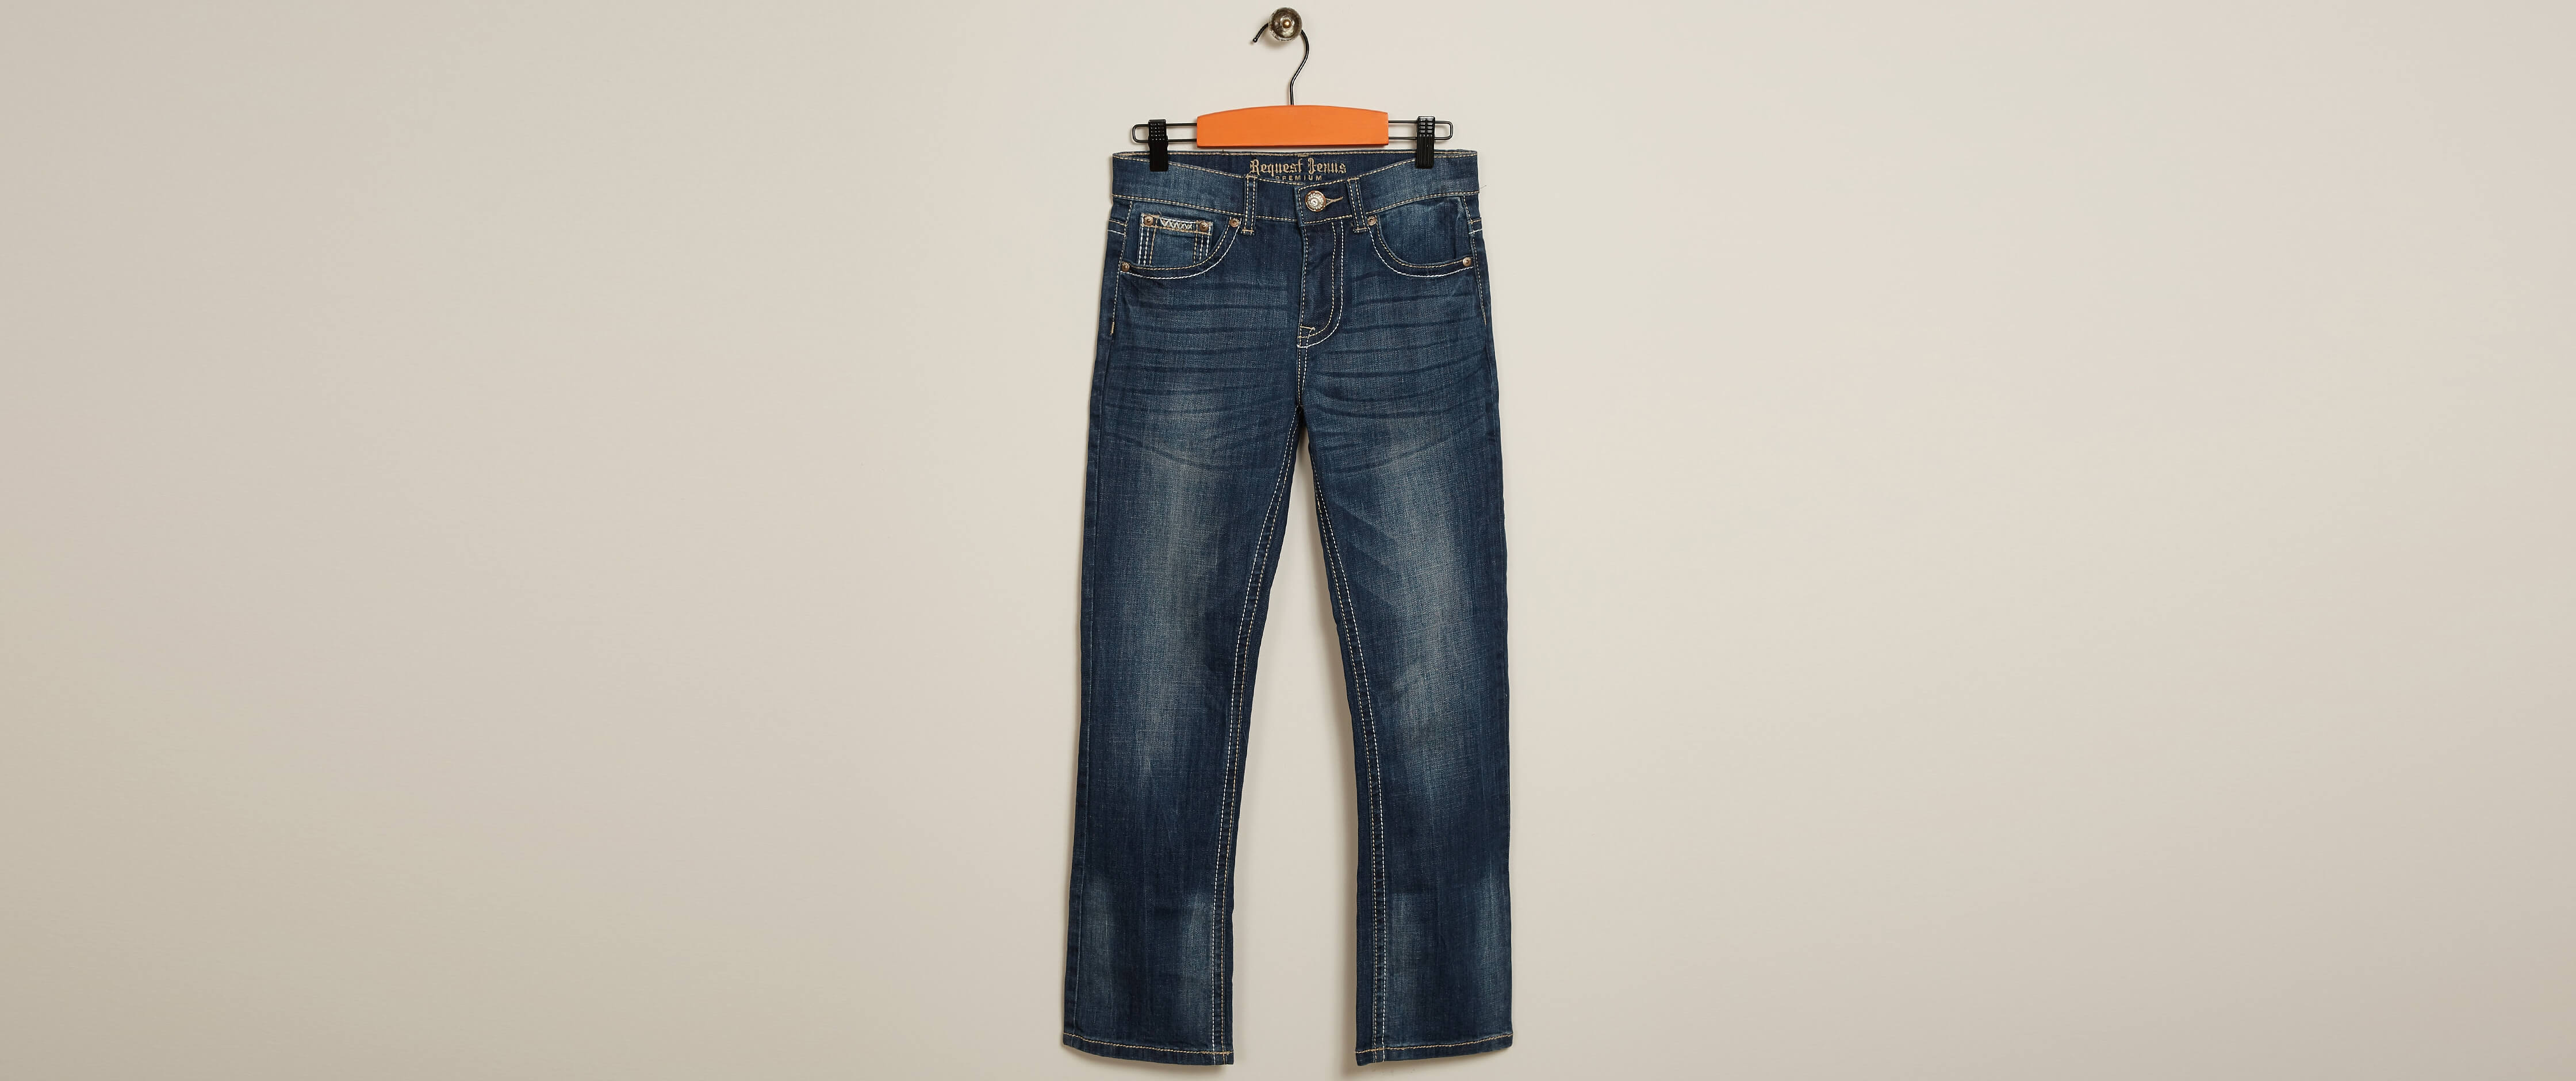 boys request jeans